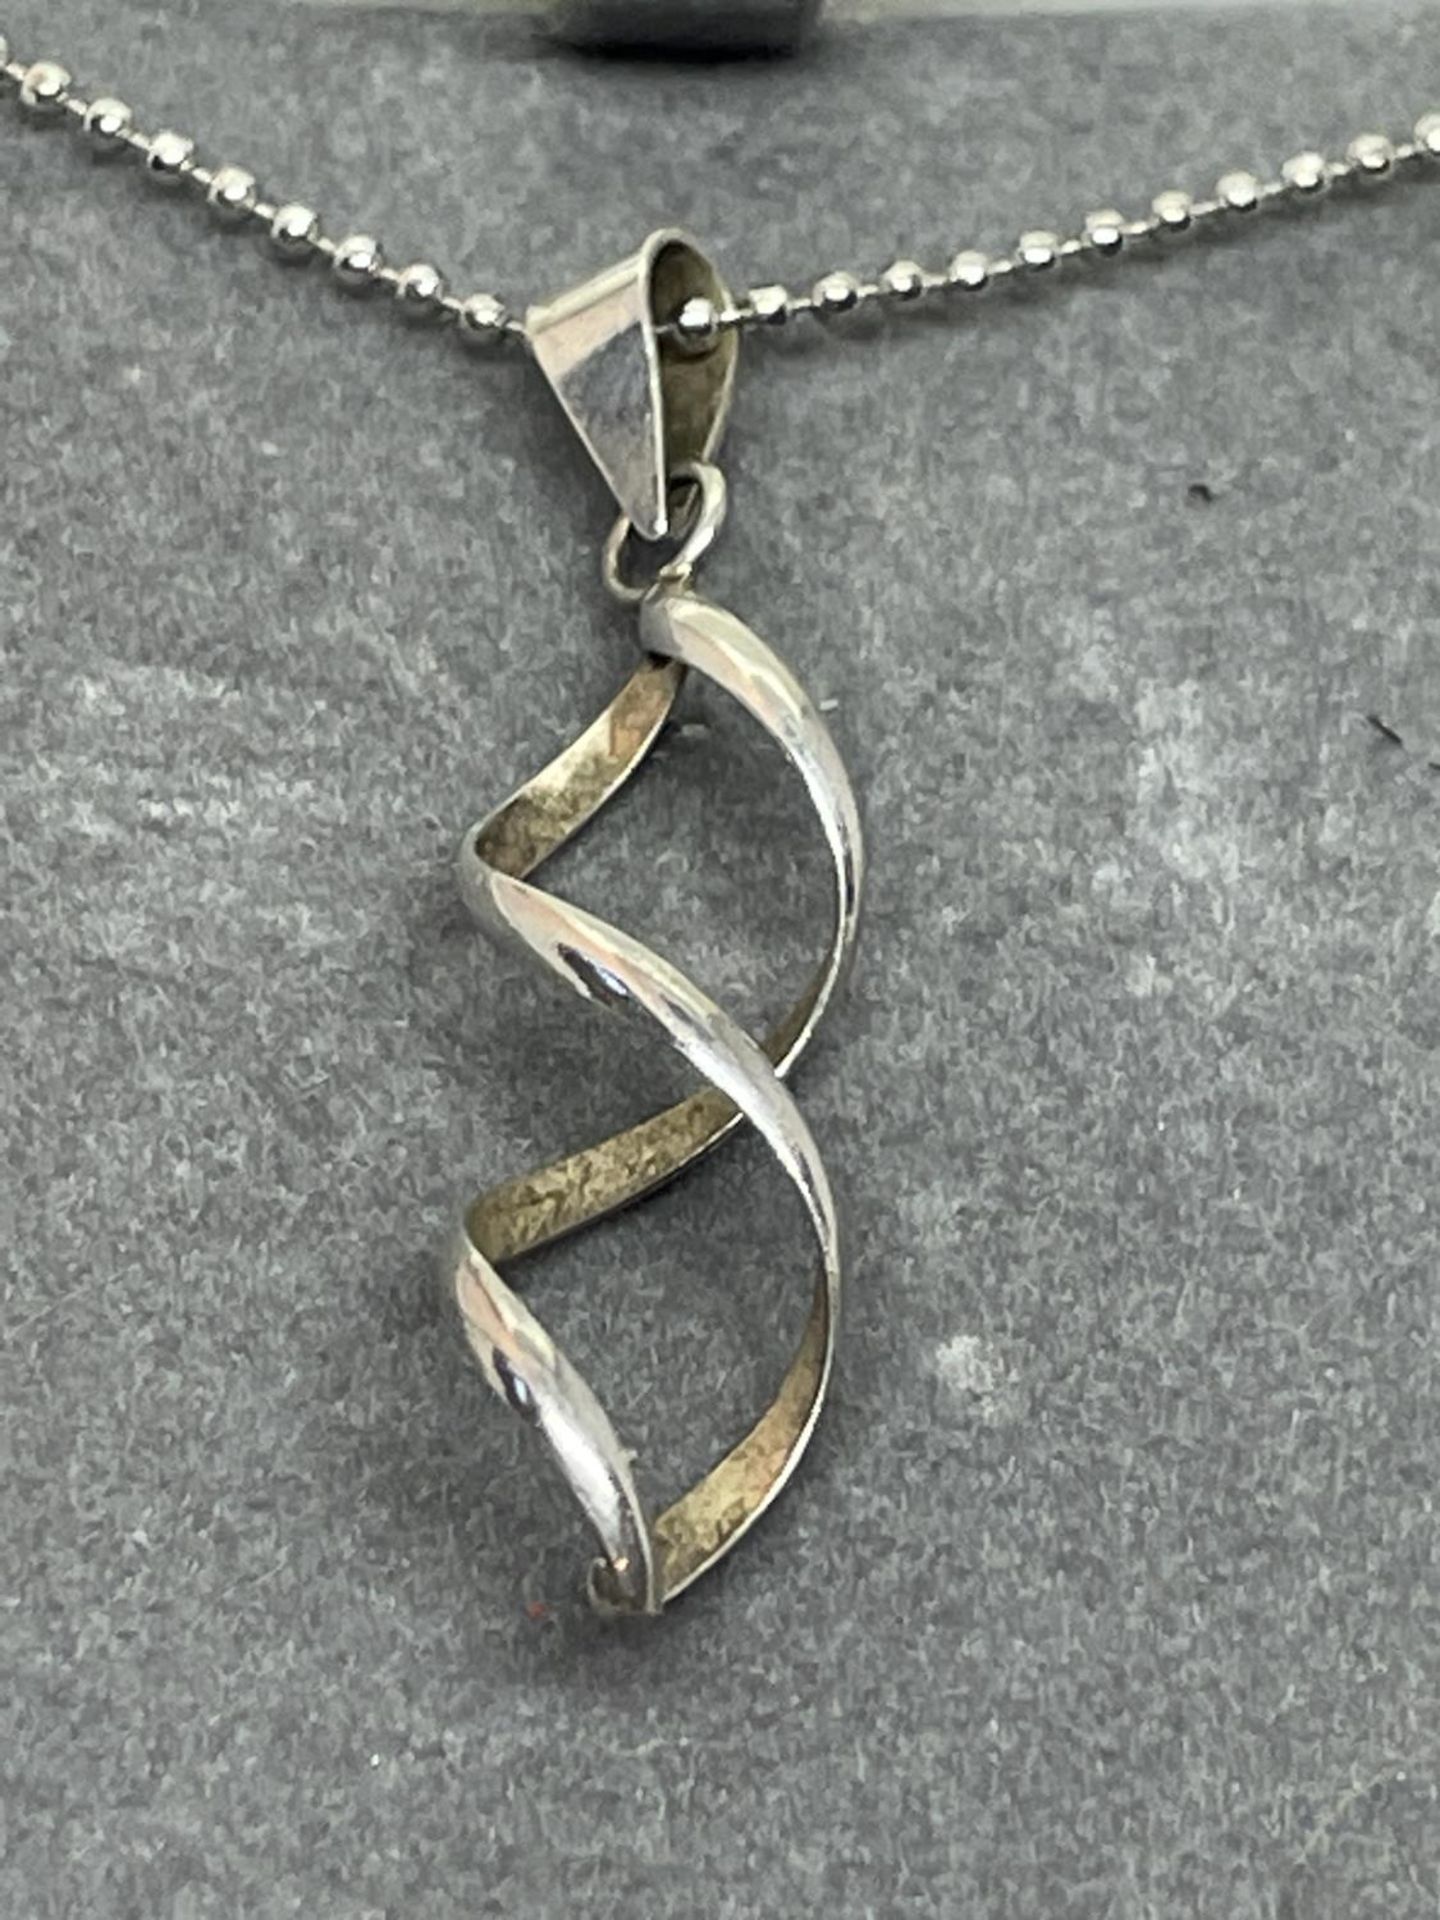 A SILVER NECKLACE IN A PRESENTATION BOX - Image 2 of 2